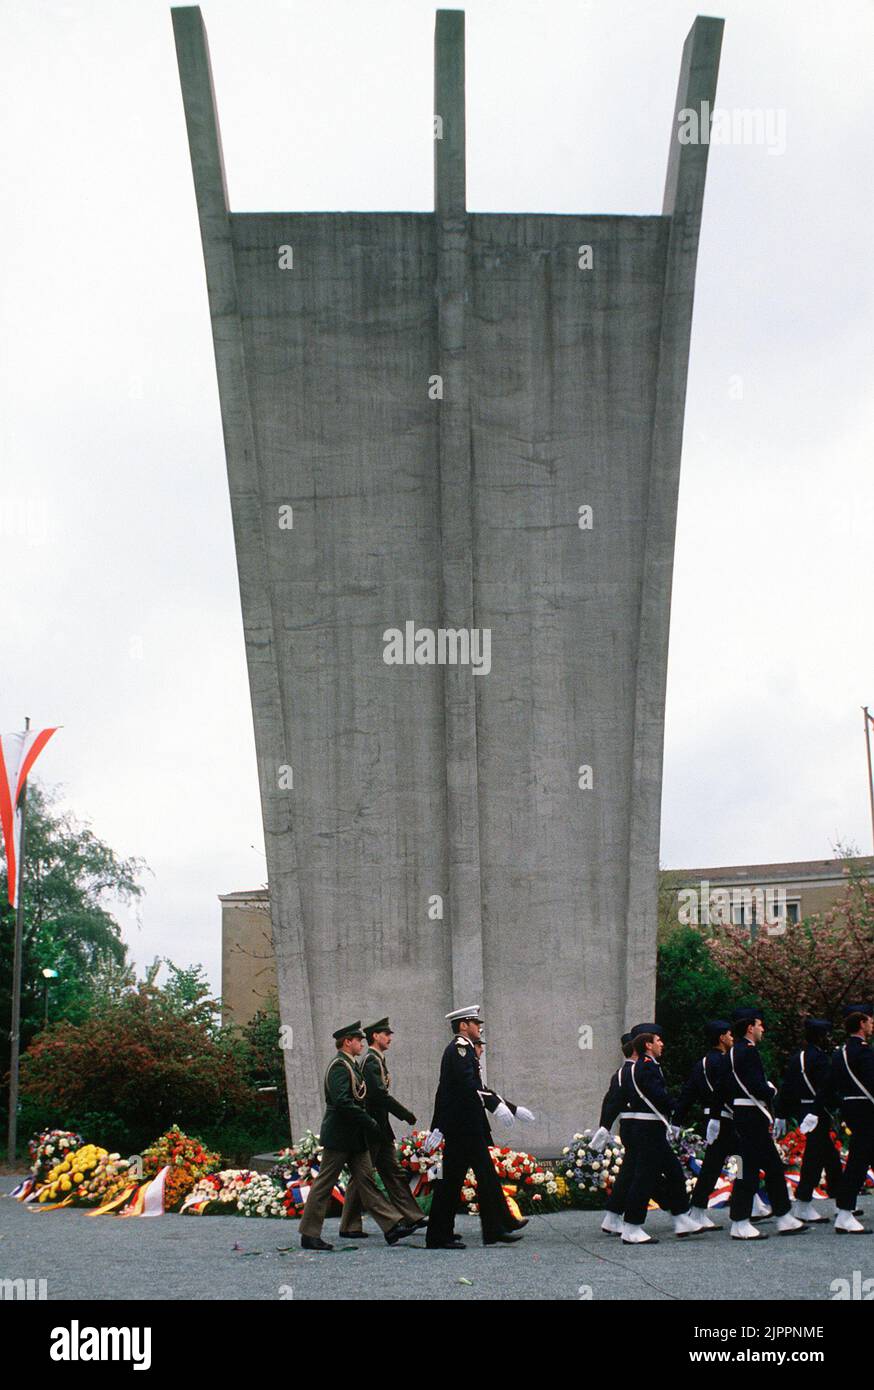 A French honor guard, followed by German policemen, marches past the Berlin Airlift Memorial during a ceremony honoring those who lost their lives during the Berlin Airlift of 1948-1949. The arc of the memorial points to the West and the prongs at the top represent the three air routes to and from West Germany, circa 1984 Stock Photo